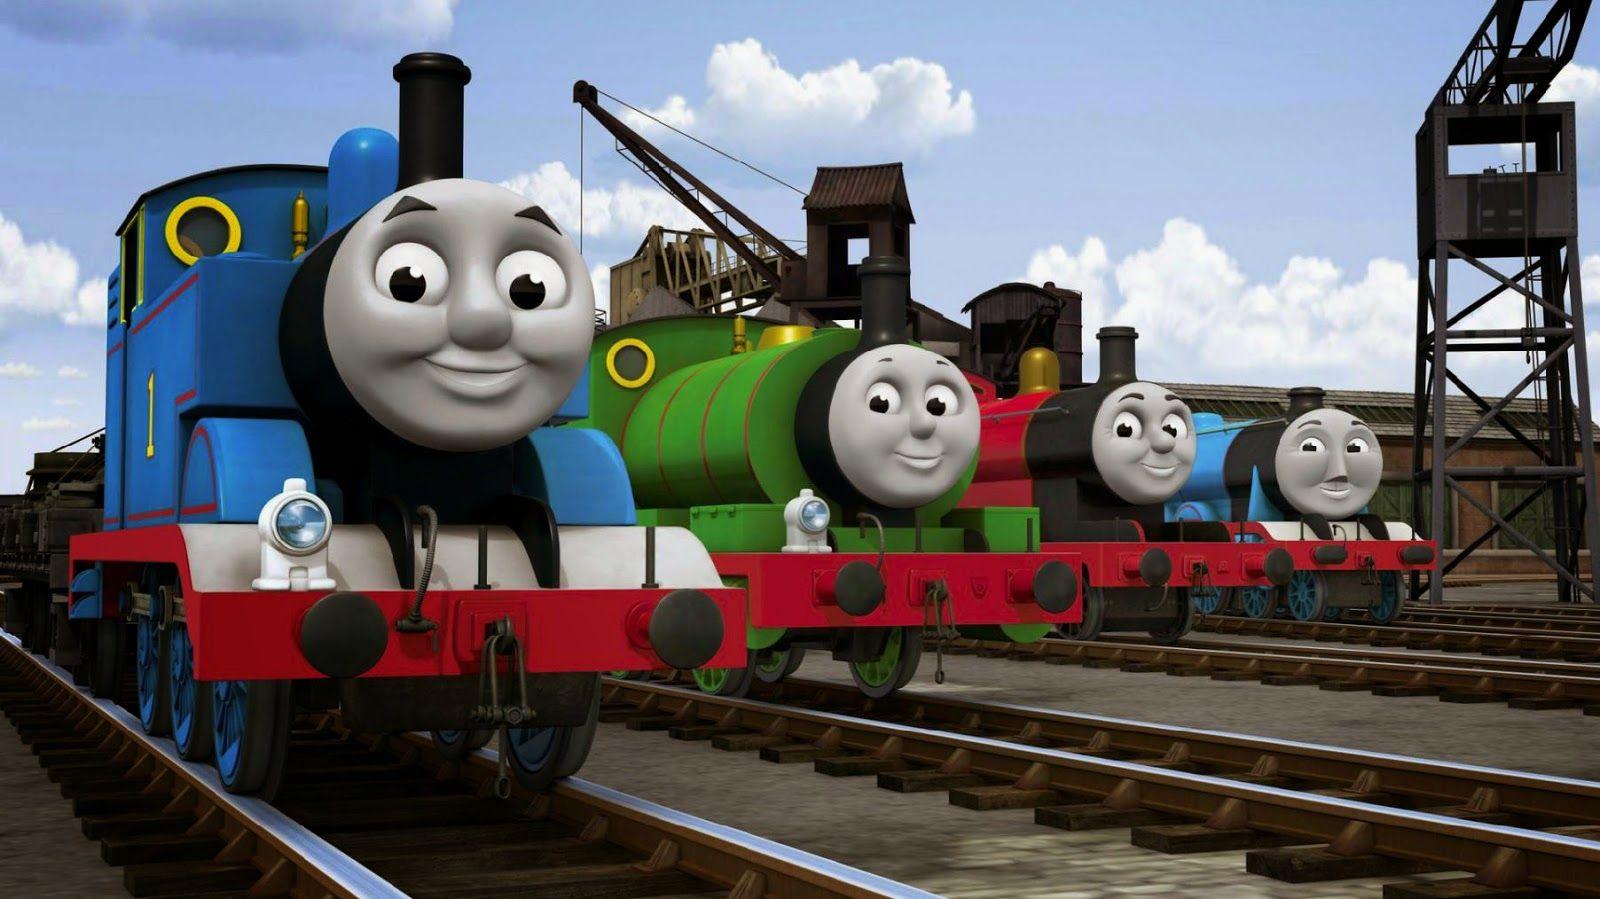 Thomas and Friends 1080P 2K 4K 5K HD wallpapers free download  Wallpaper  Flare